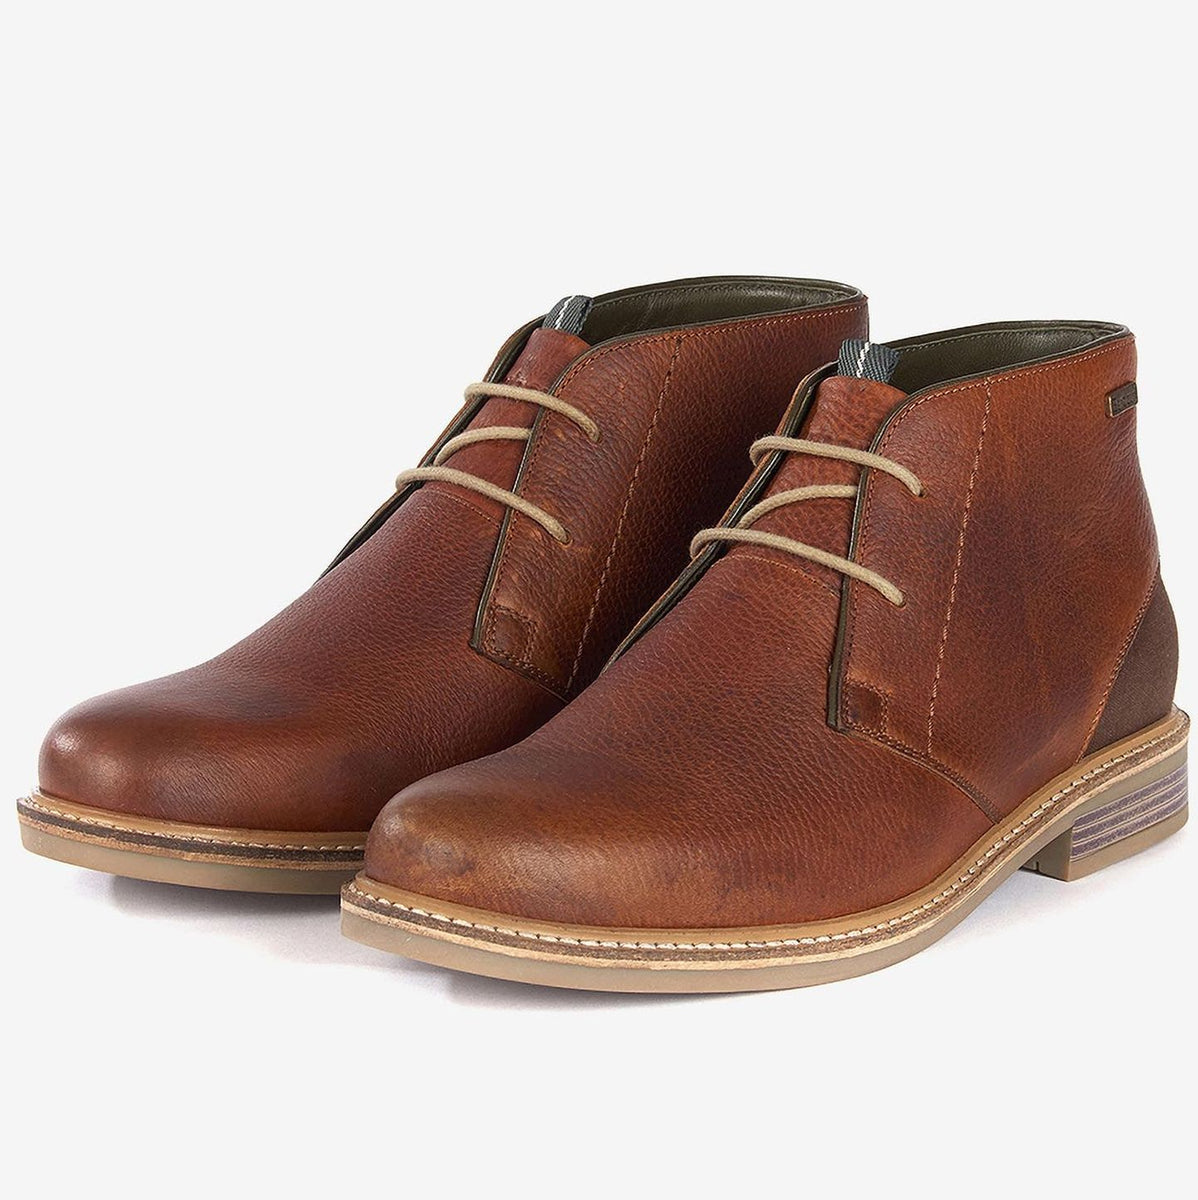 Barbour Boots Redhead Chukka Boots in Cognac Brown Leather - MFO0138TA ...